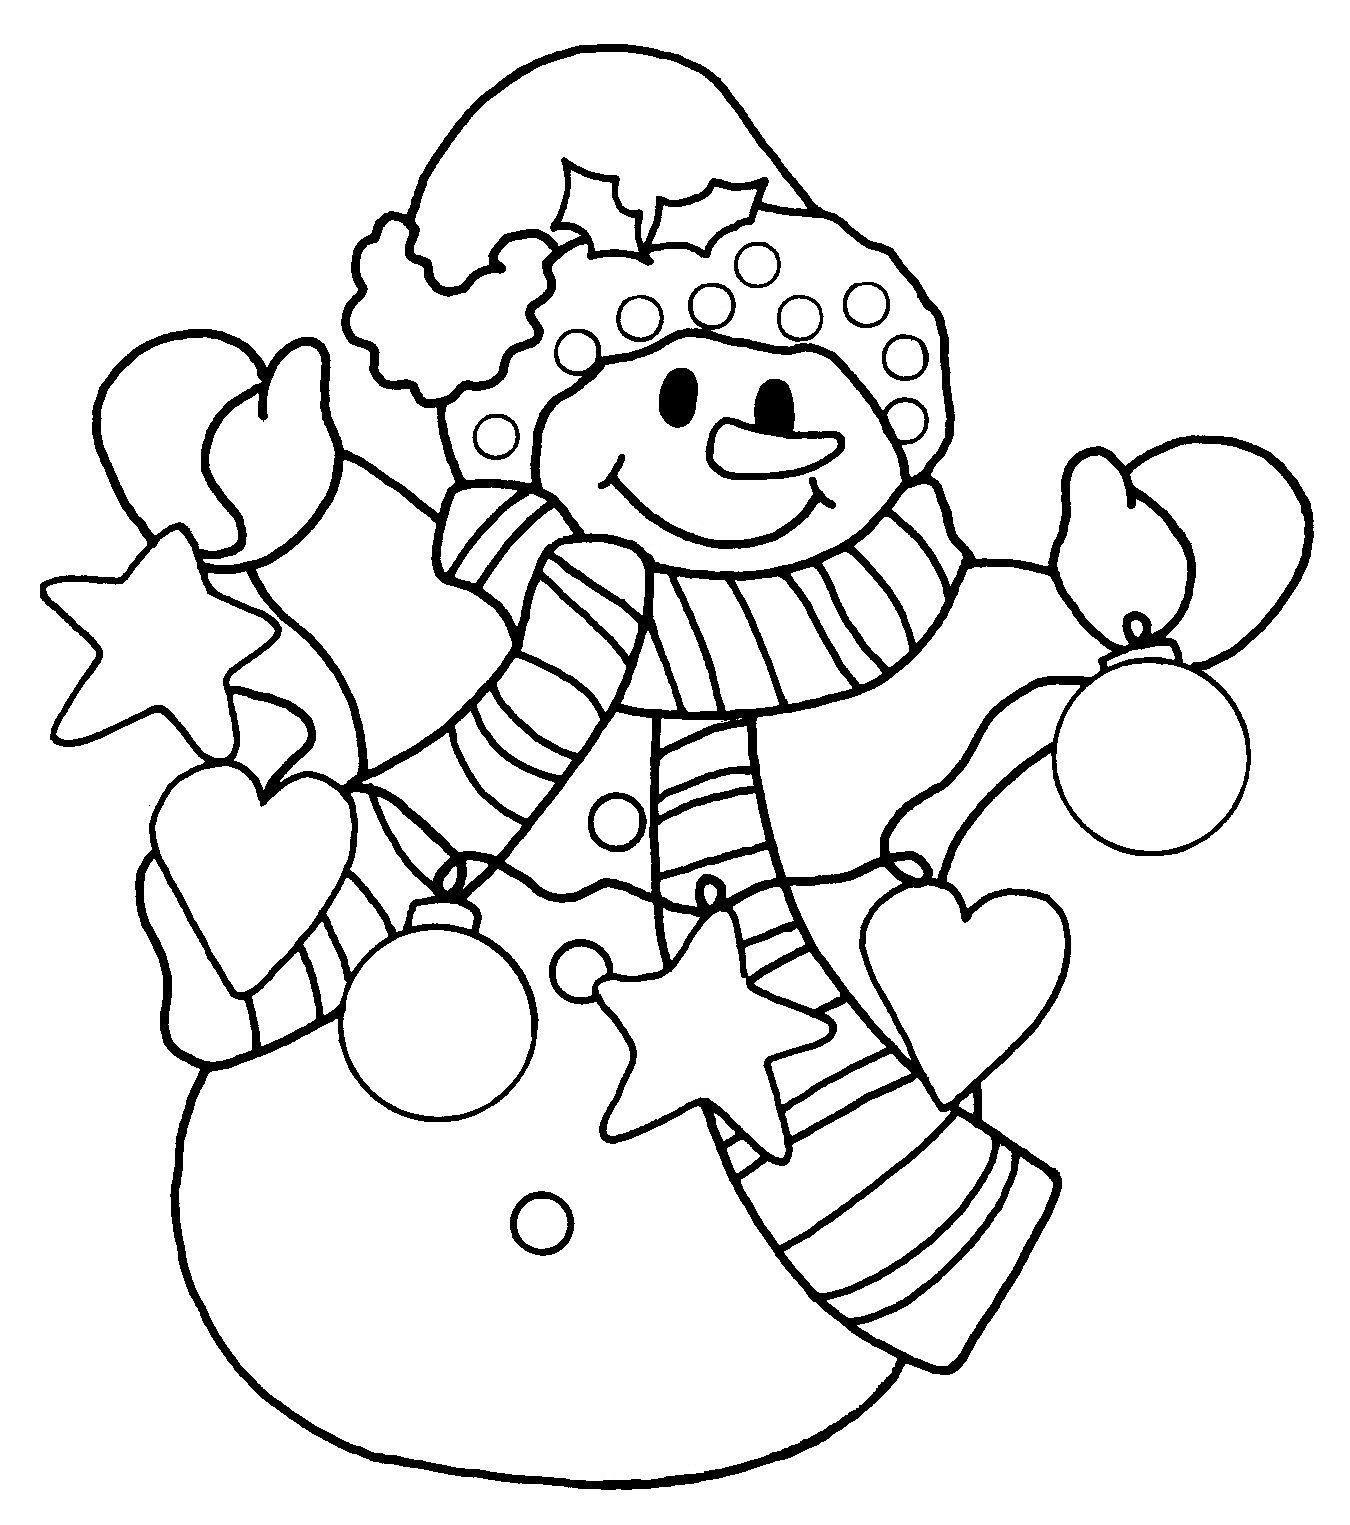 Snowman Coloring Pages For Kids 1